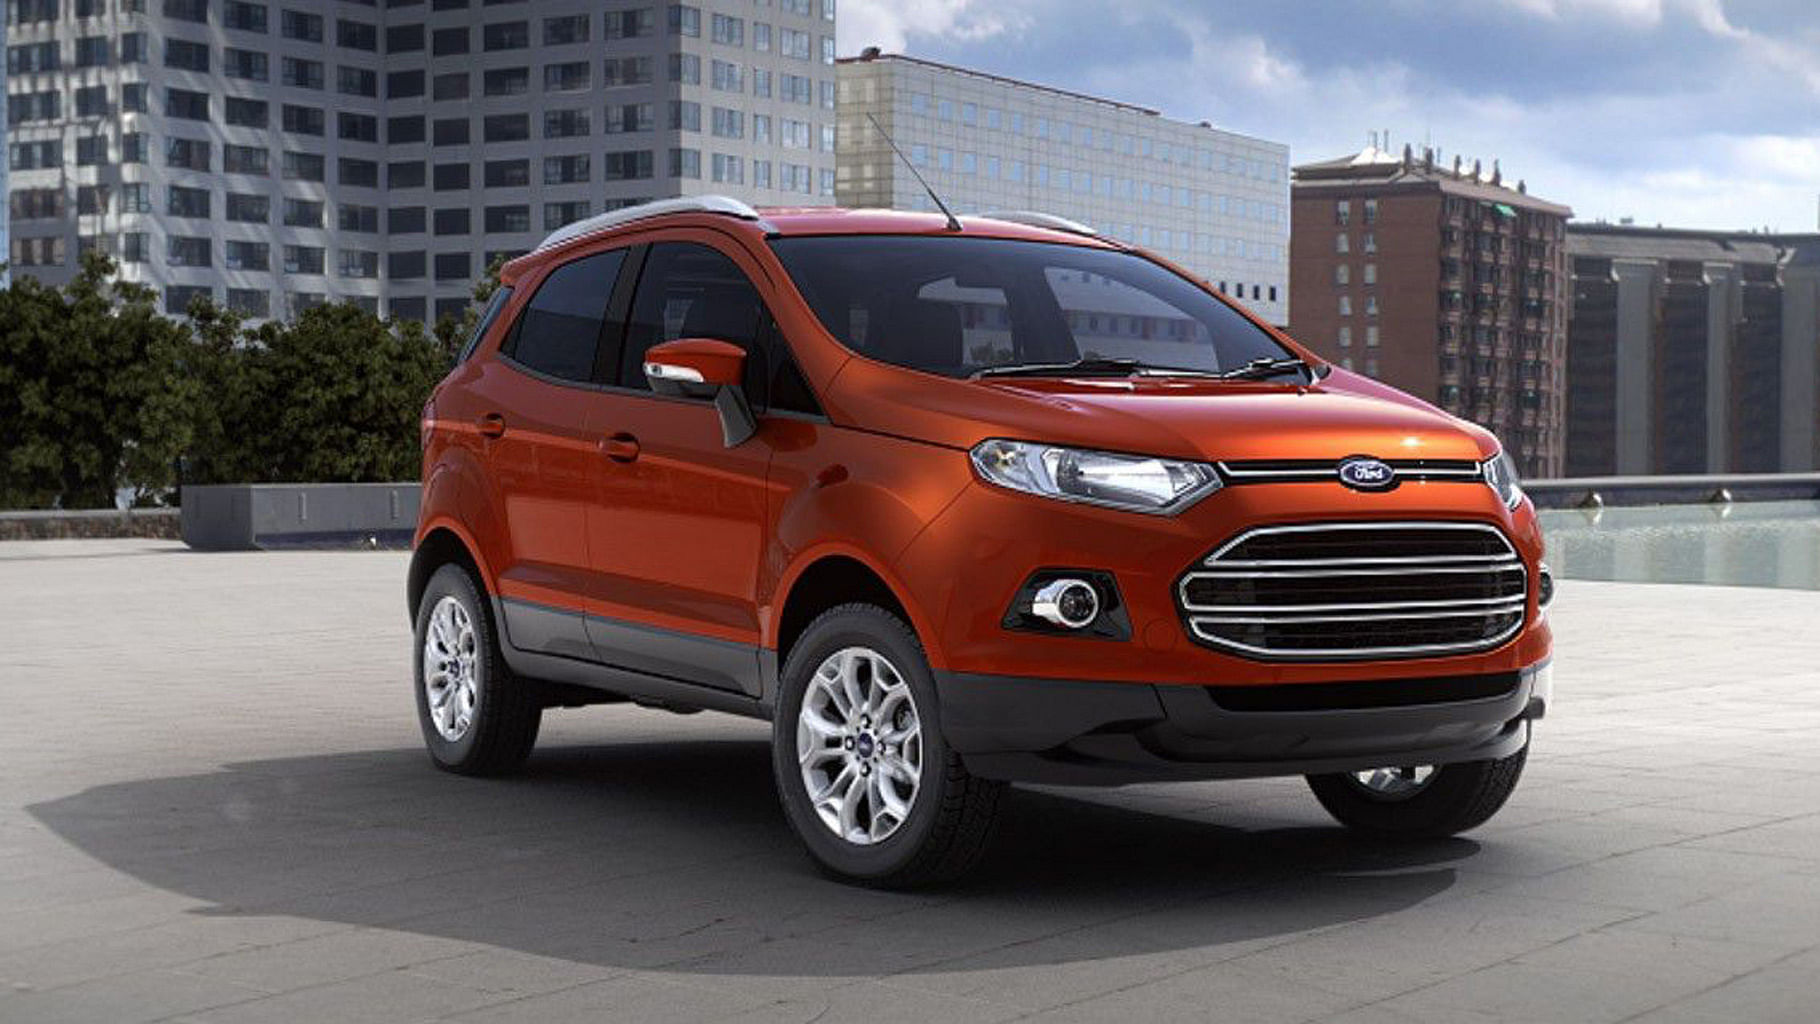 Ford Ecosport. (Photo: <a href="http://www.india.ford.com/suvs/ecosport">Ford India</a>)